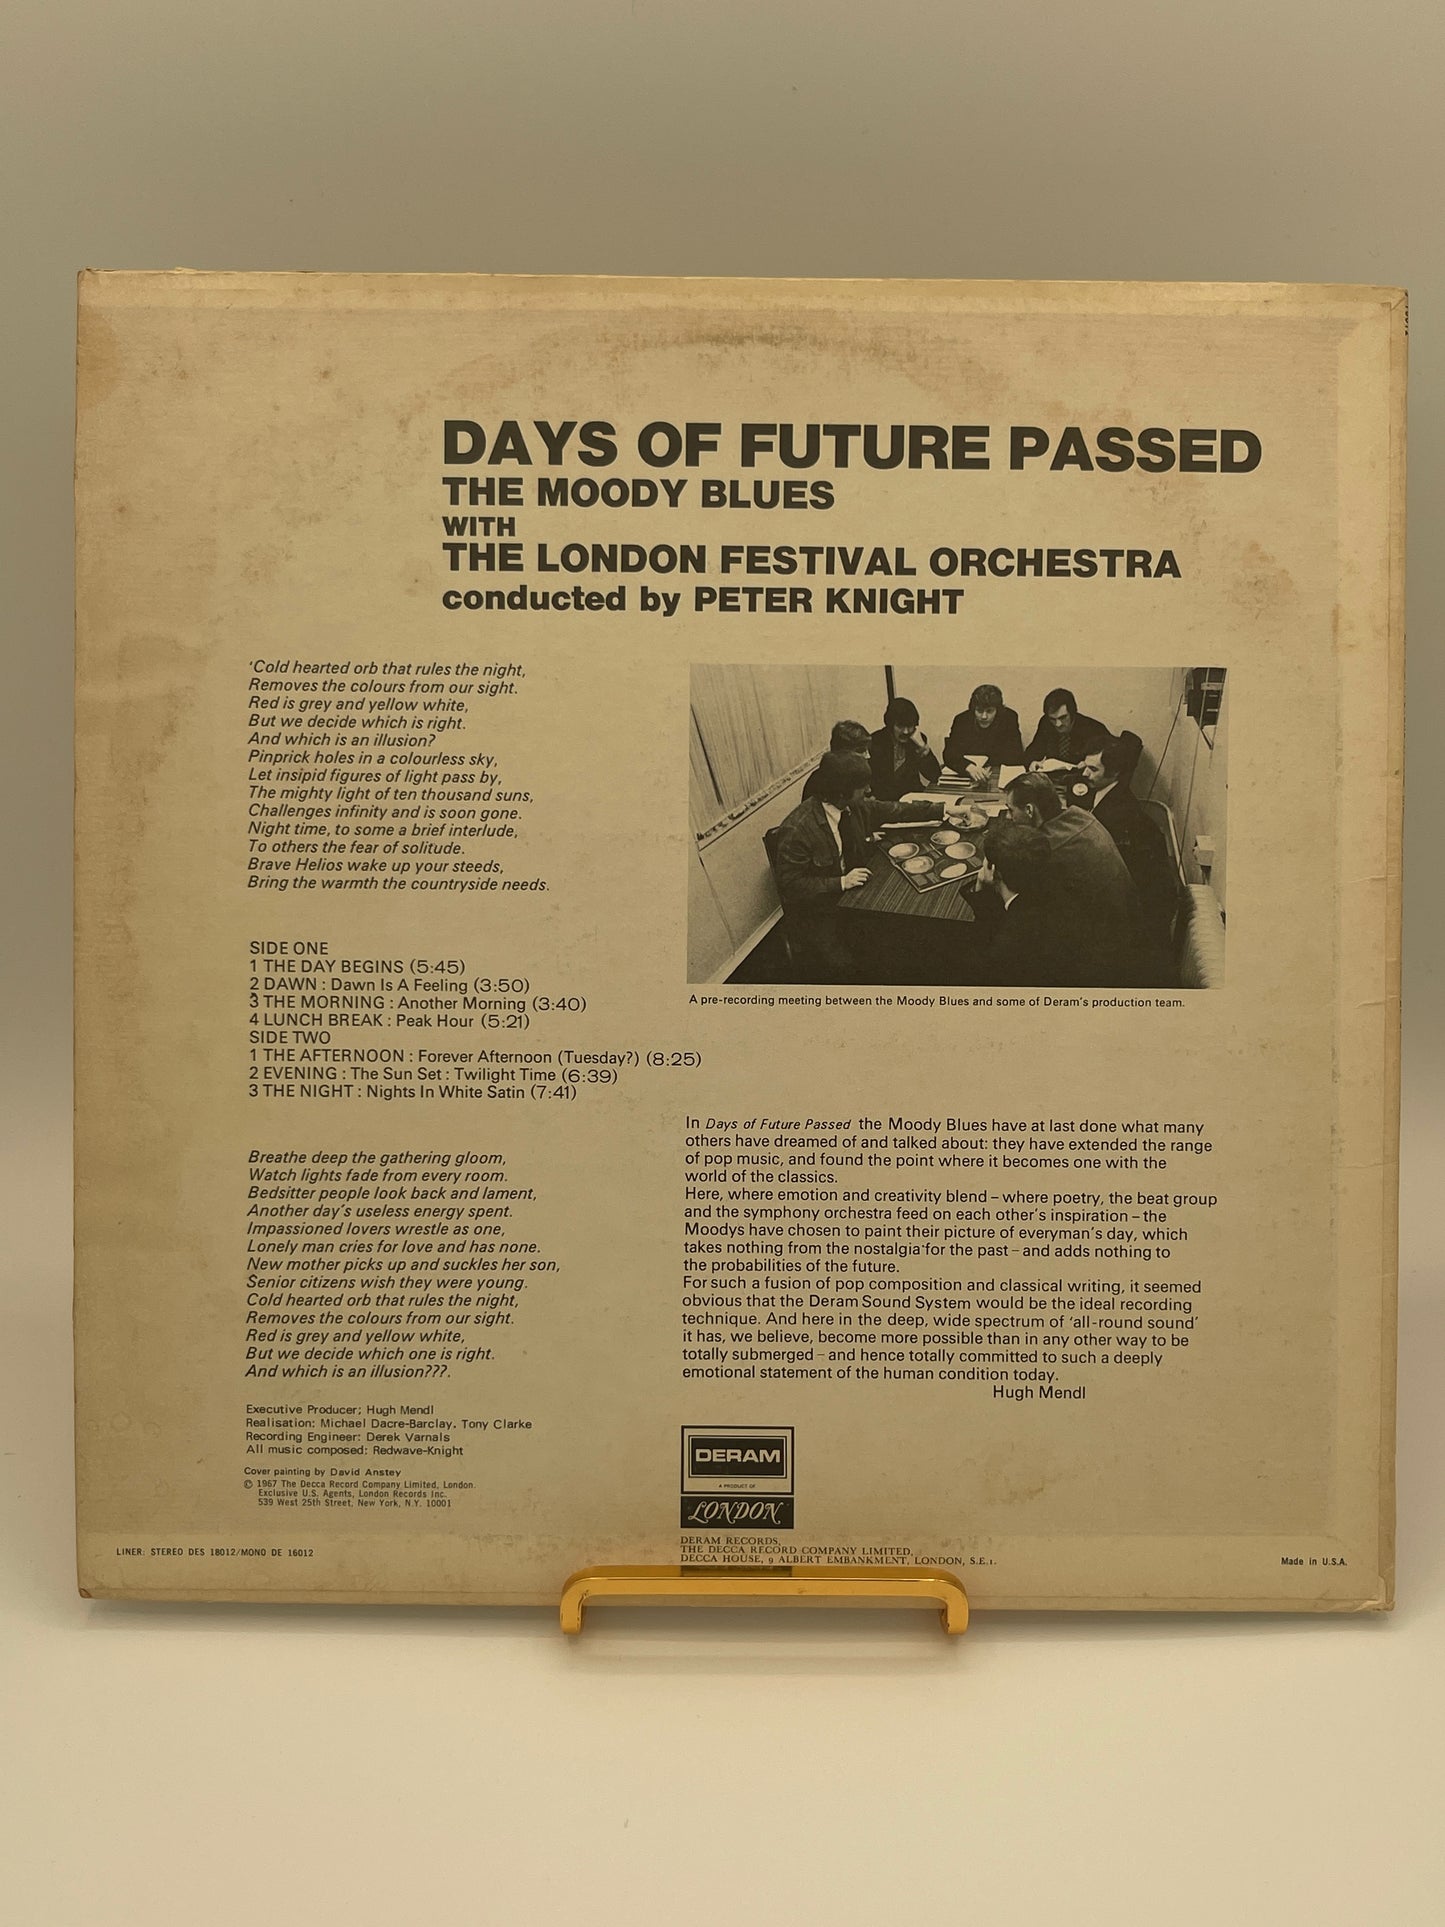 The Moody Blues - Days of Future Passed (1967 Bestway)